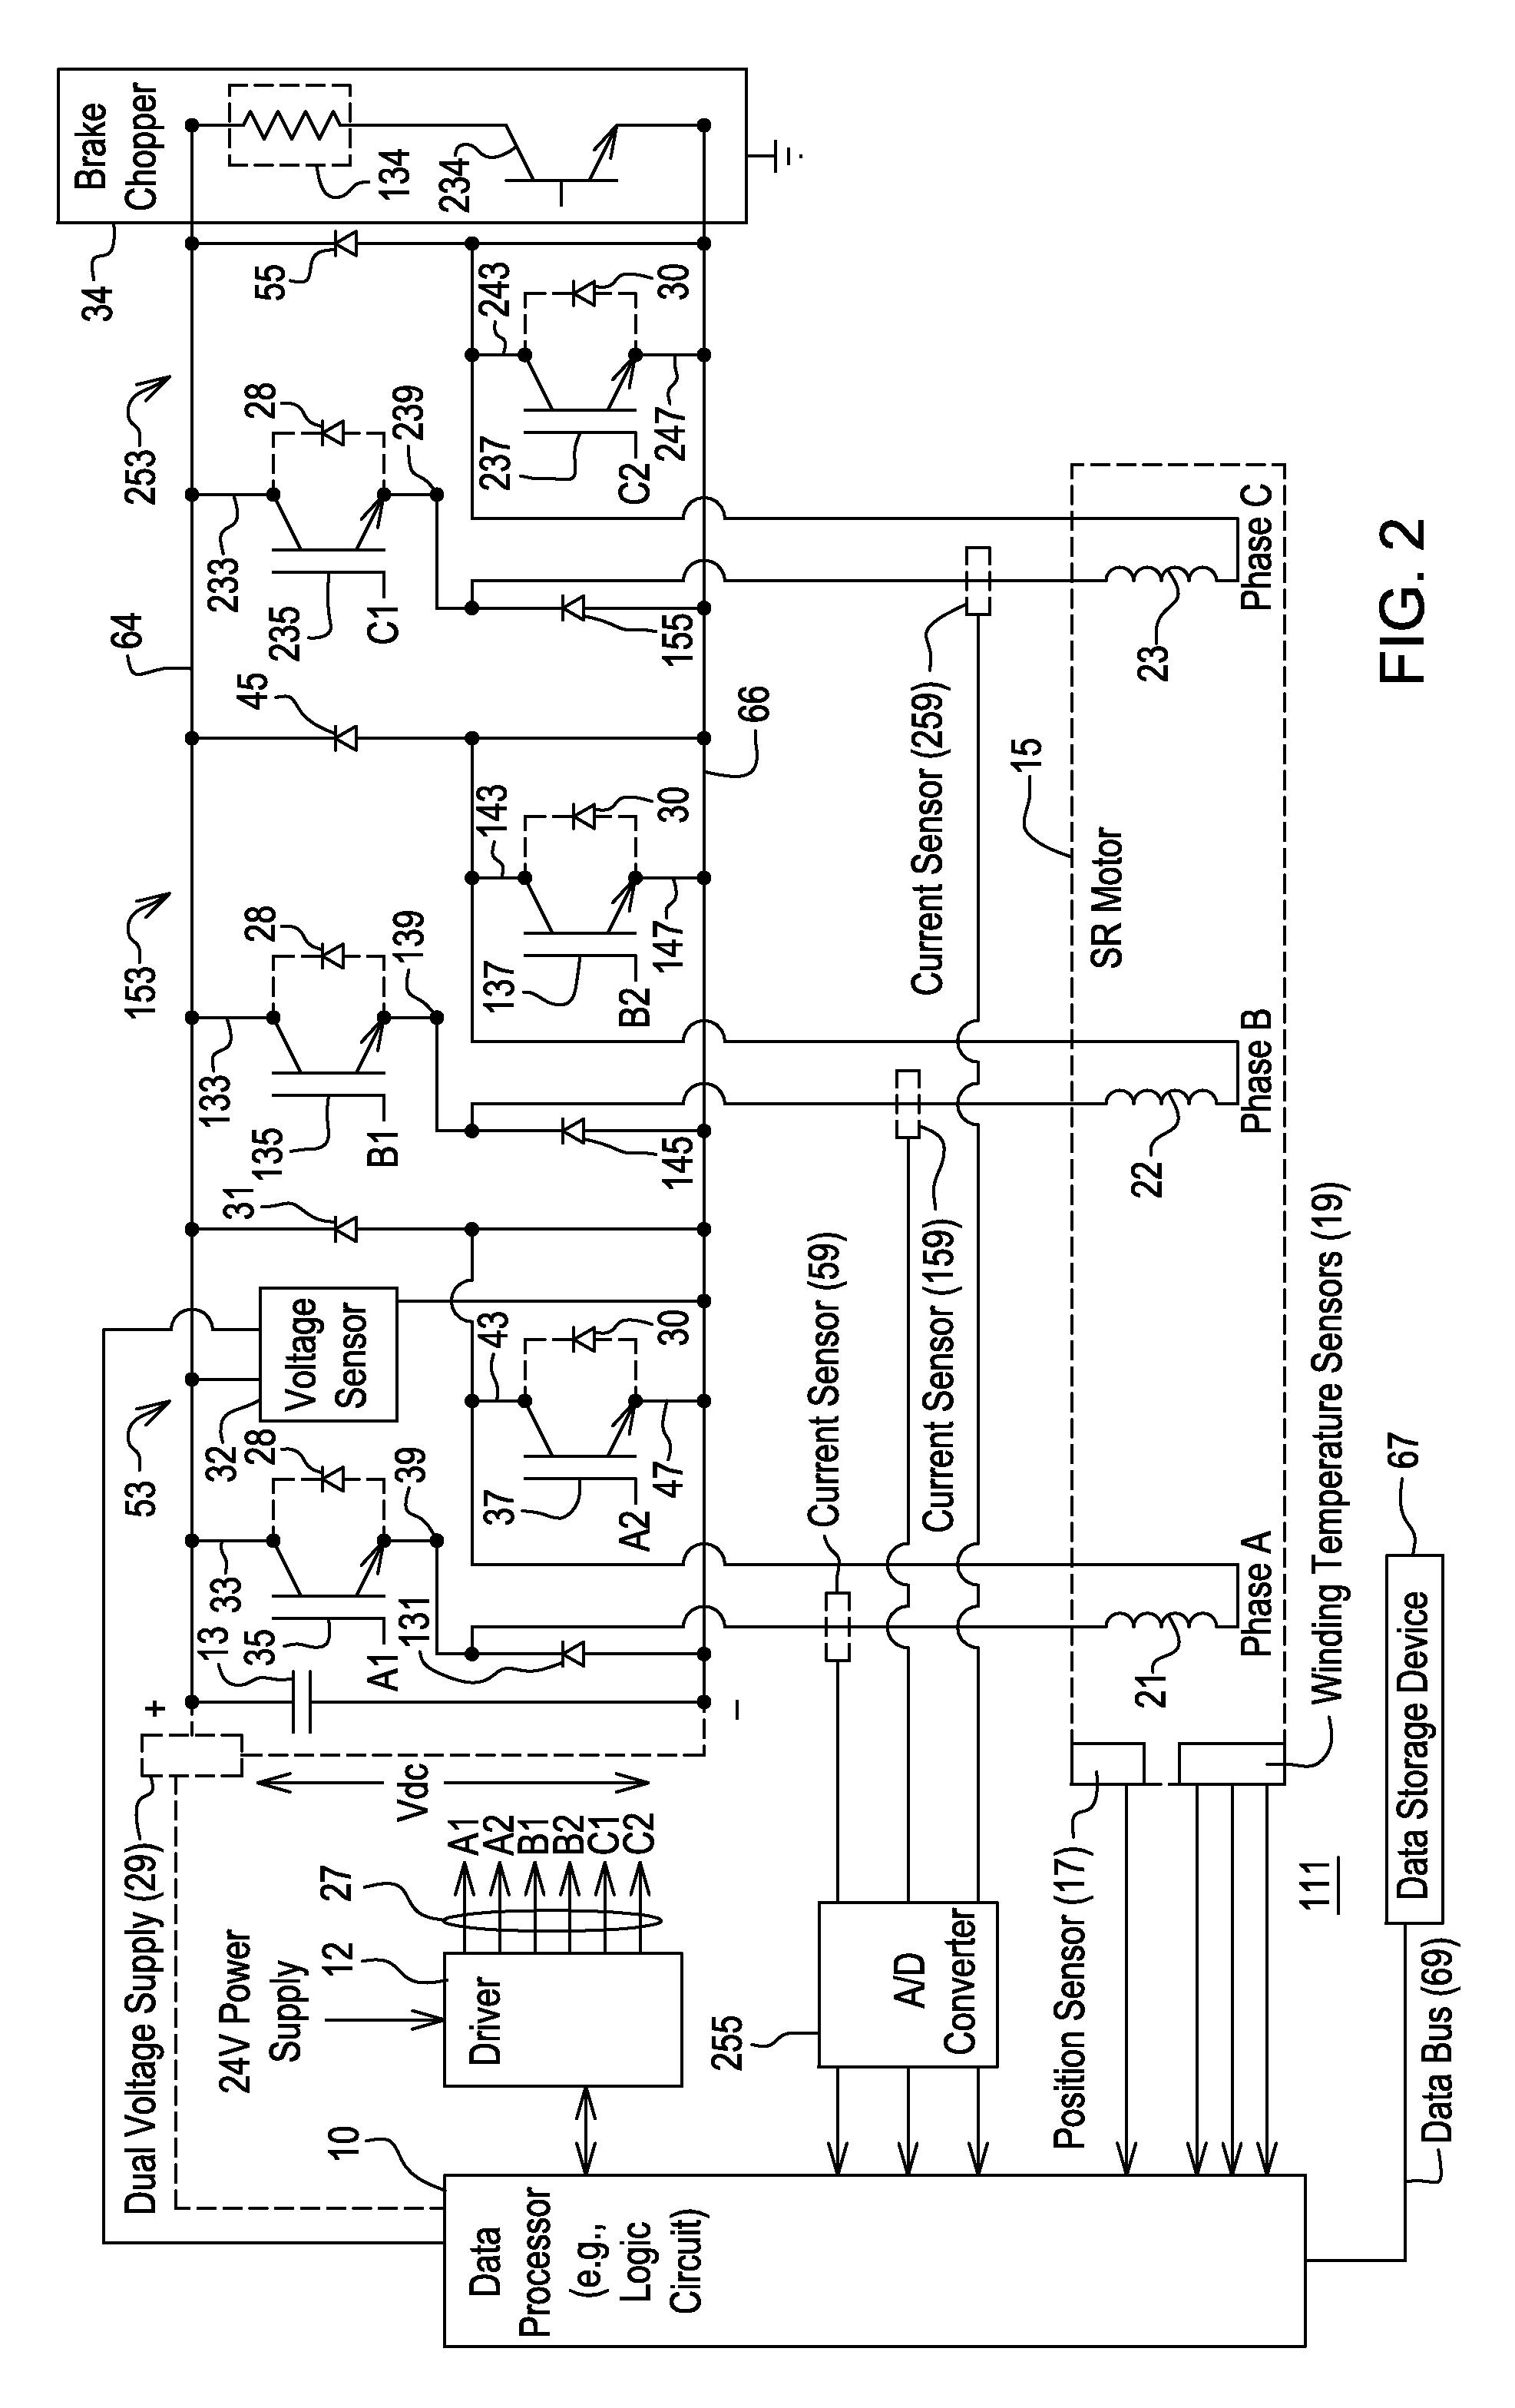 Method and controller for an electric motor with switch testing